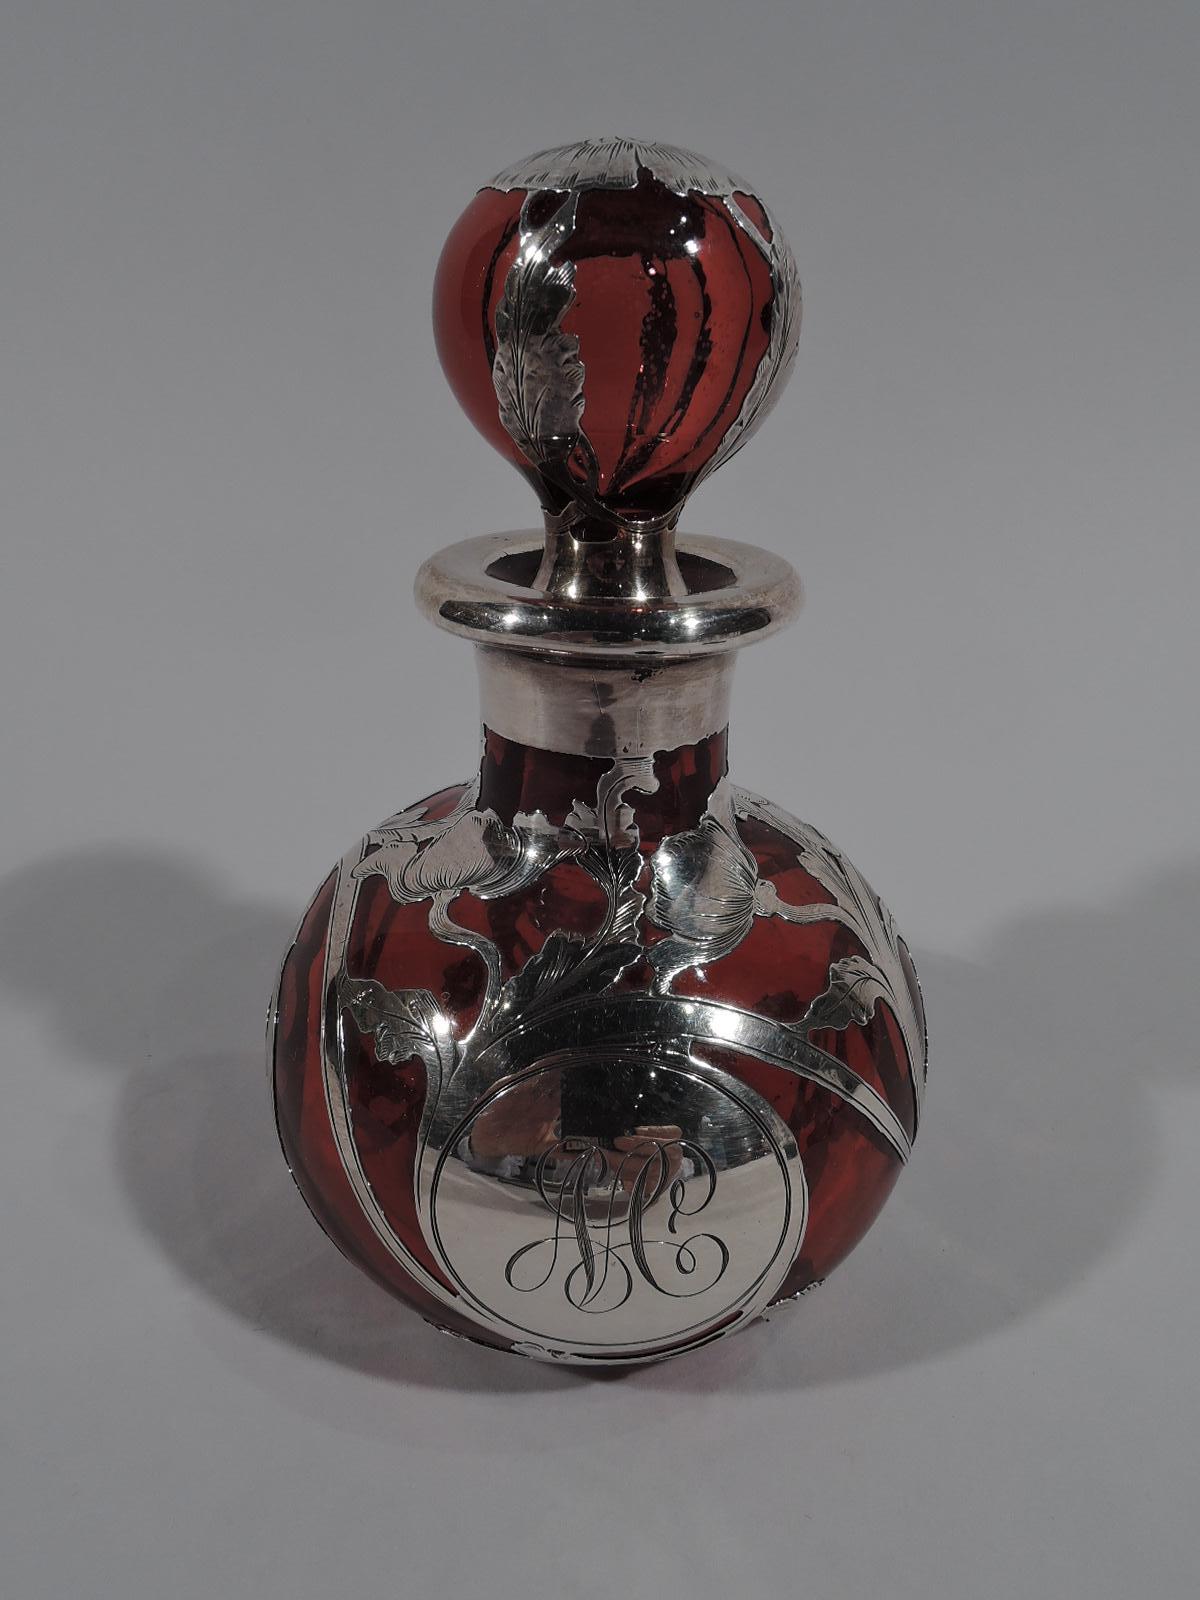 Beautiful turn-of-the-century red glass perfume with engraved silver overlay. Made by Gorham in Providence. Globular bottle with short neck and ball stopper. Classical rinceaux overlay and circular frame engraved with interlaced monogram. Maker’s